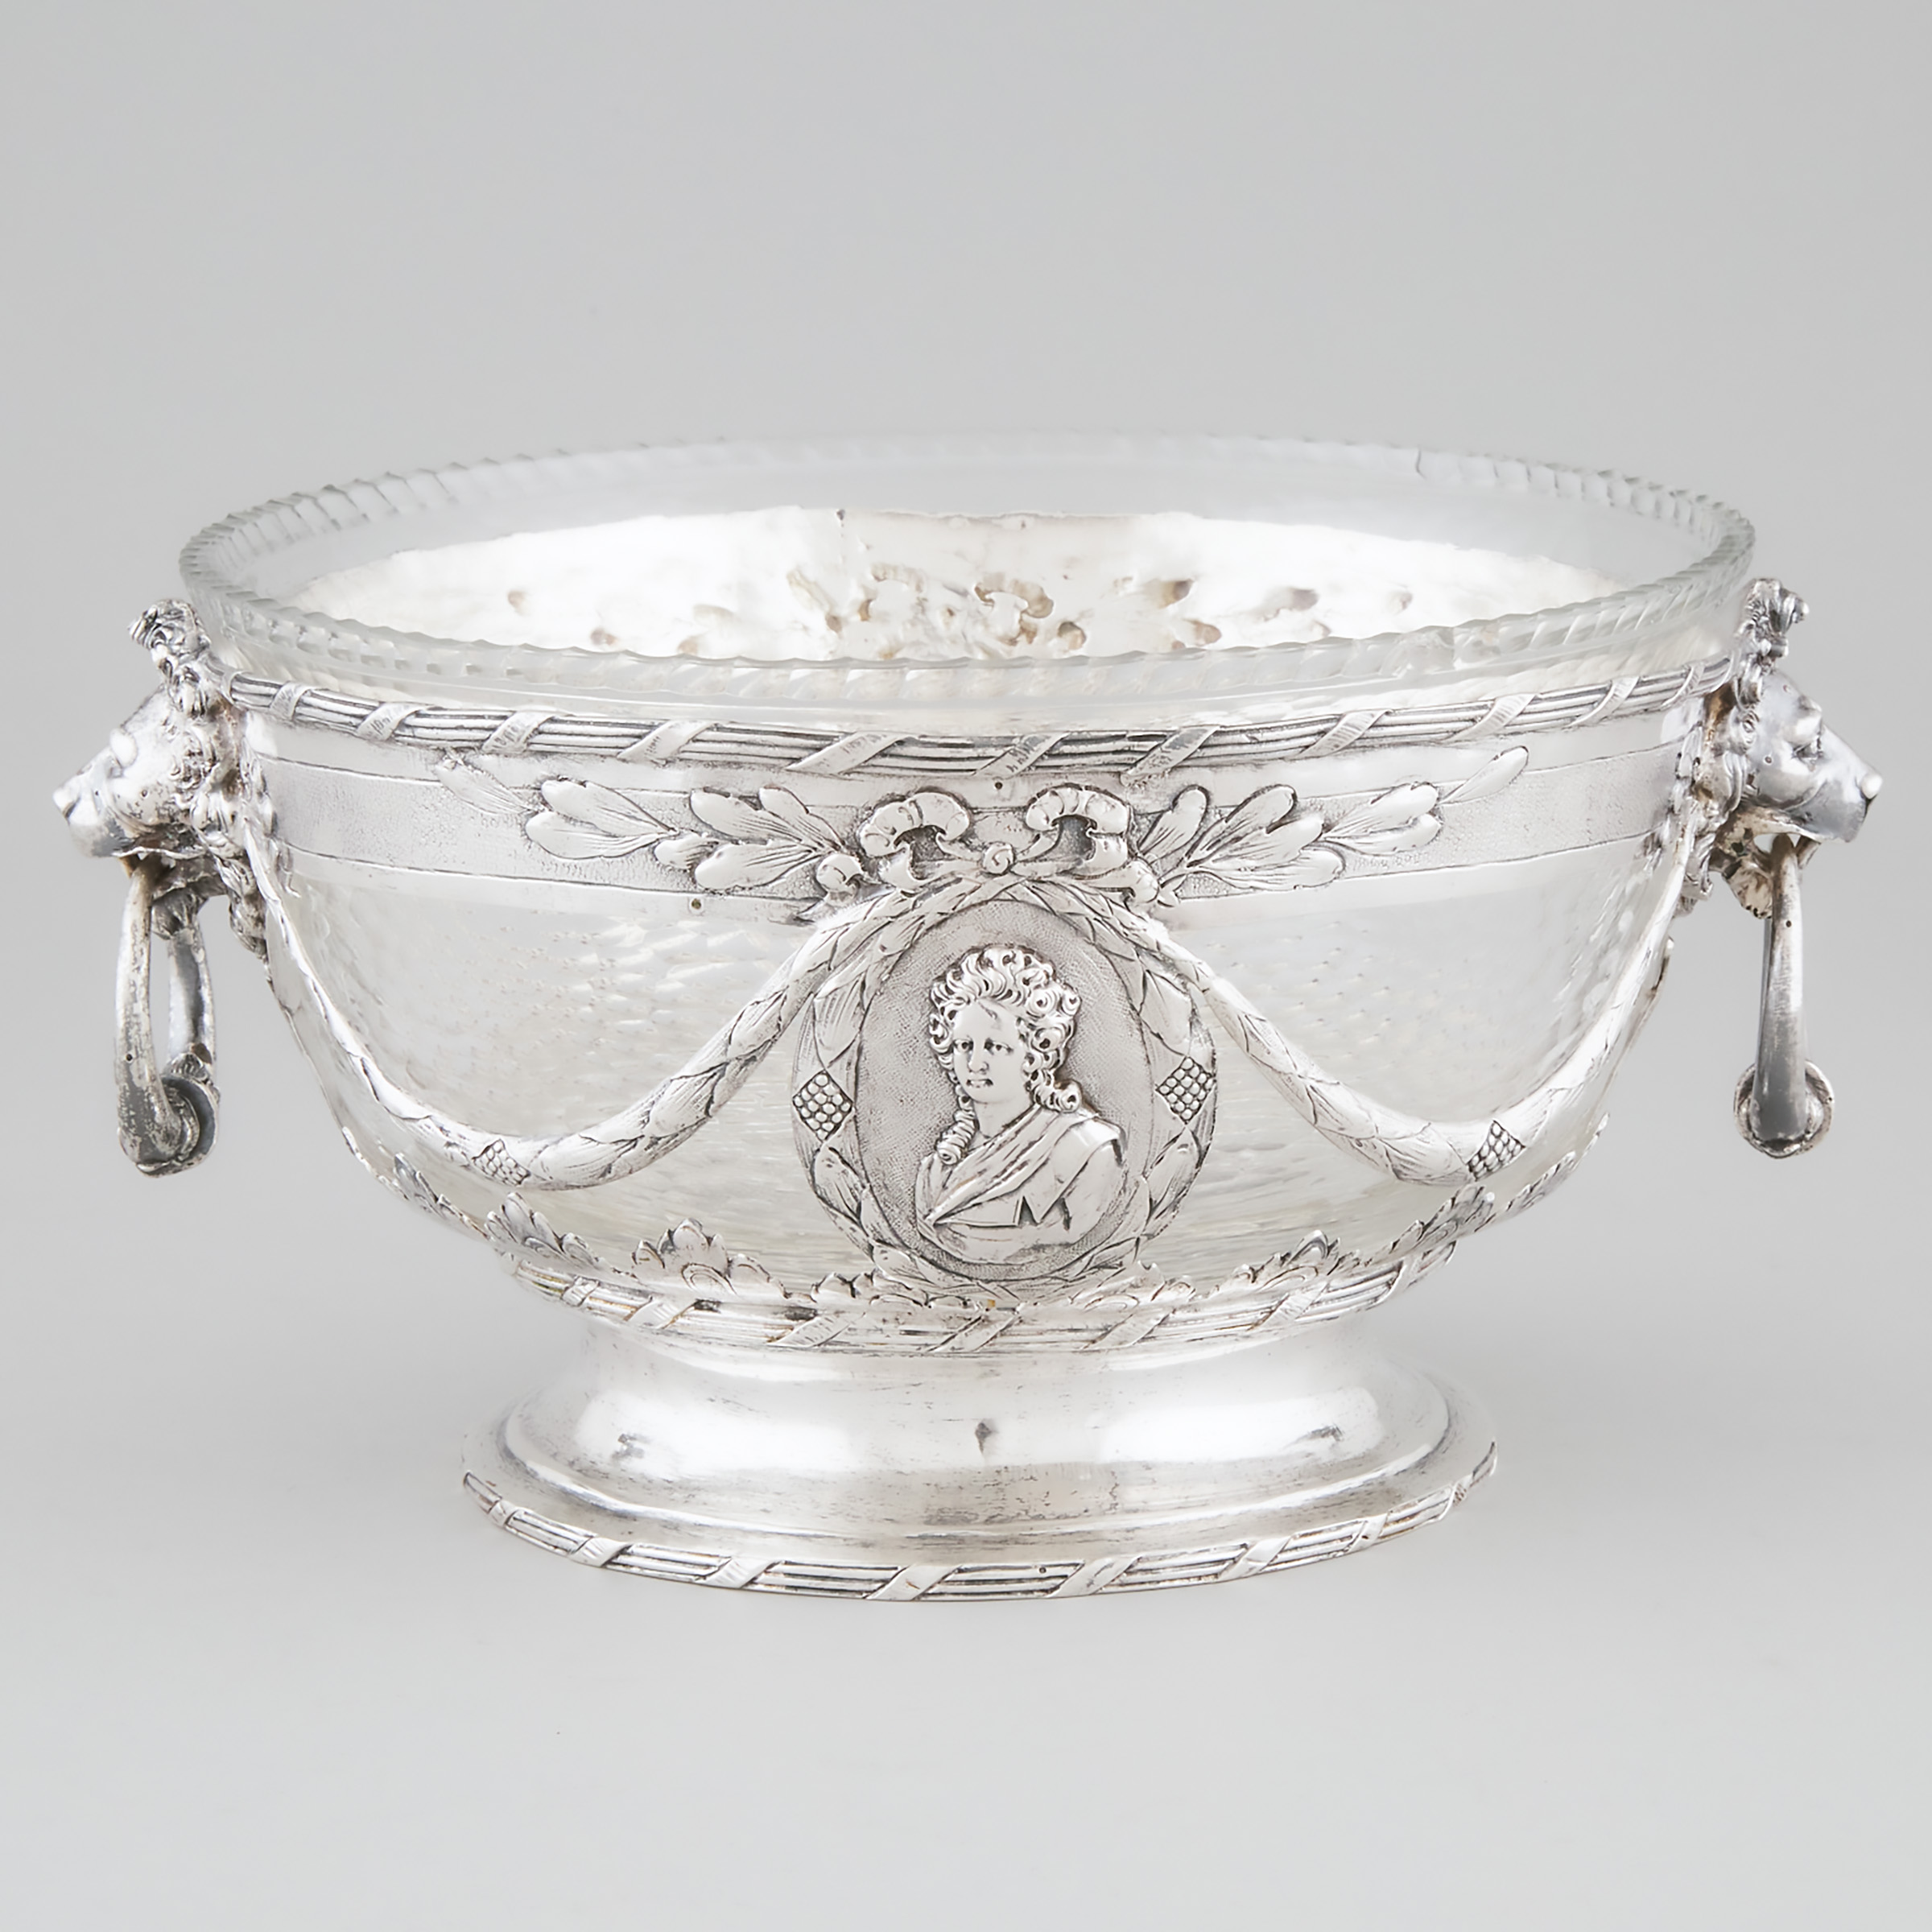 German Silver and Cut Glass Bowl  2a563a